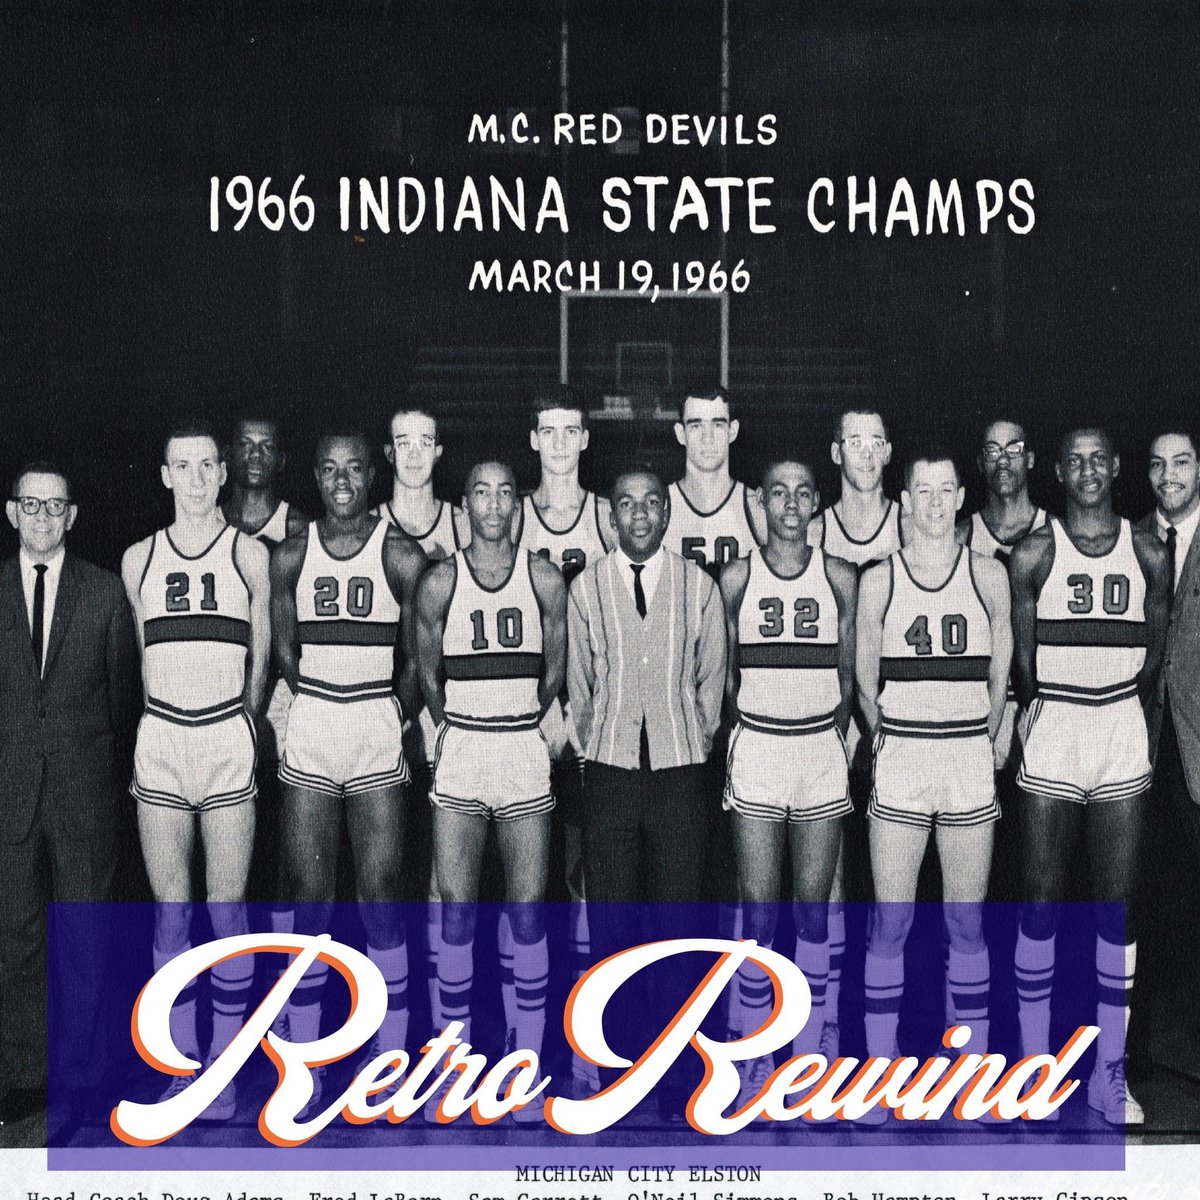 #RetroRewind |  Michigan City Elston Red Devils, 1904-1995, School Colors: Red and White

The Red Devils of Michigan City Elston saw great basketball success throughout their history. They won 38 sectional titles, 14 of which came consecutively leading up to their 1966 state… https://t.co/lfGYM8UuEx https://t.co/MGbS27BpiZ